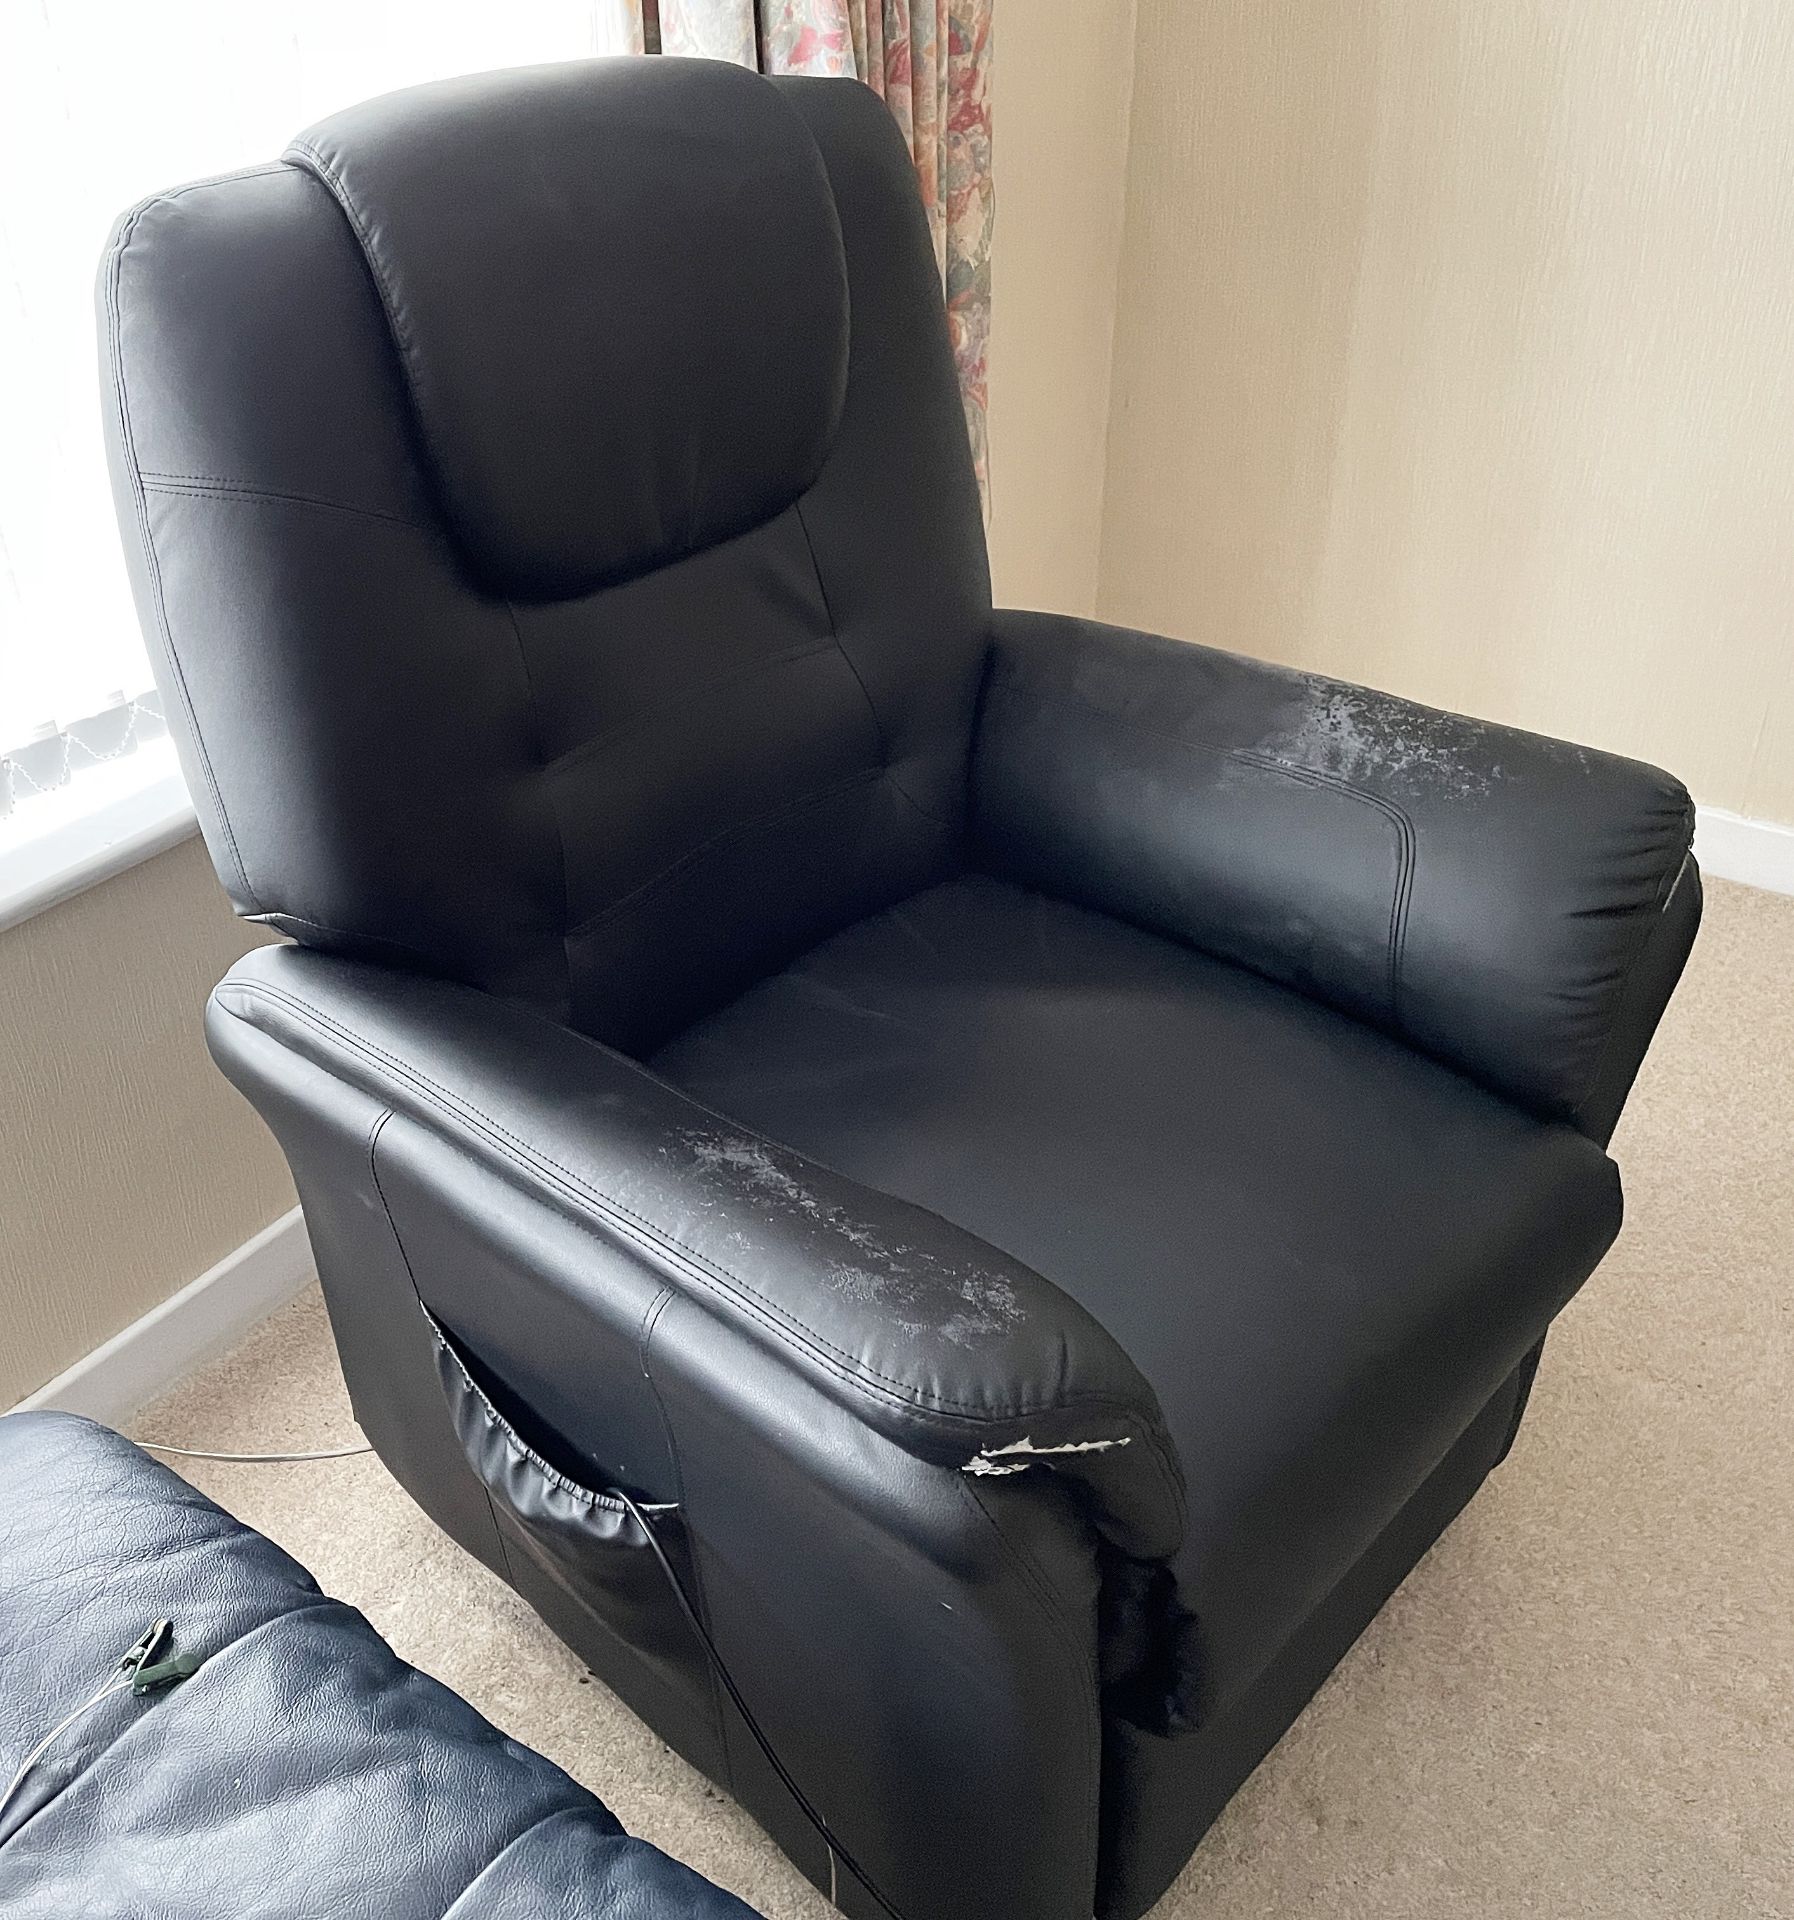 1 x Stylish Motorised Recliner Chair In Black - From An Exclusive Property In Leeds - No VAT on